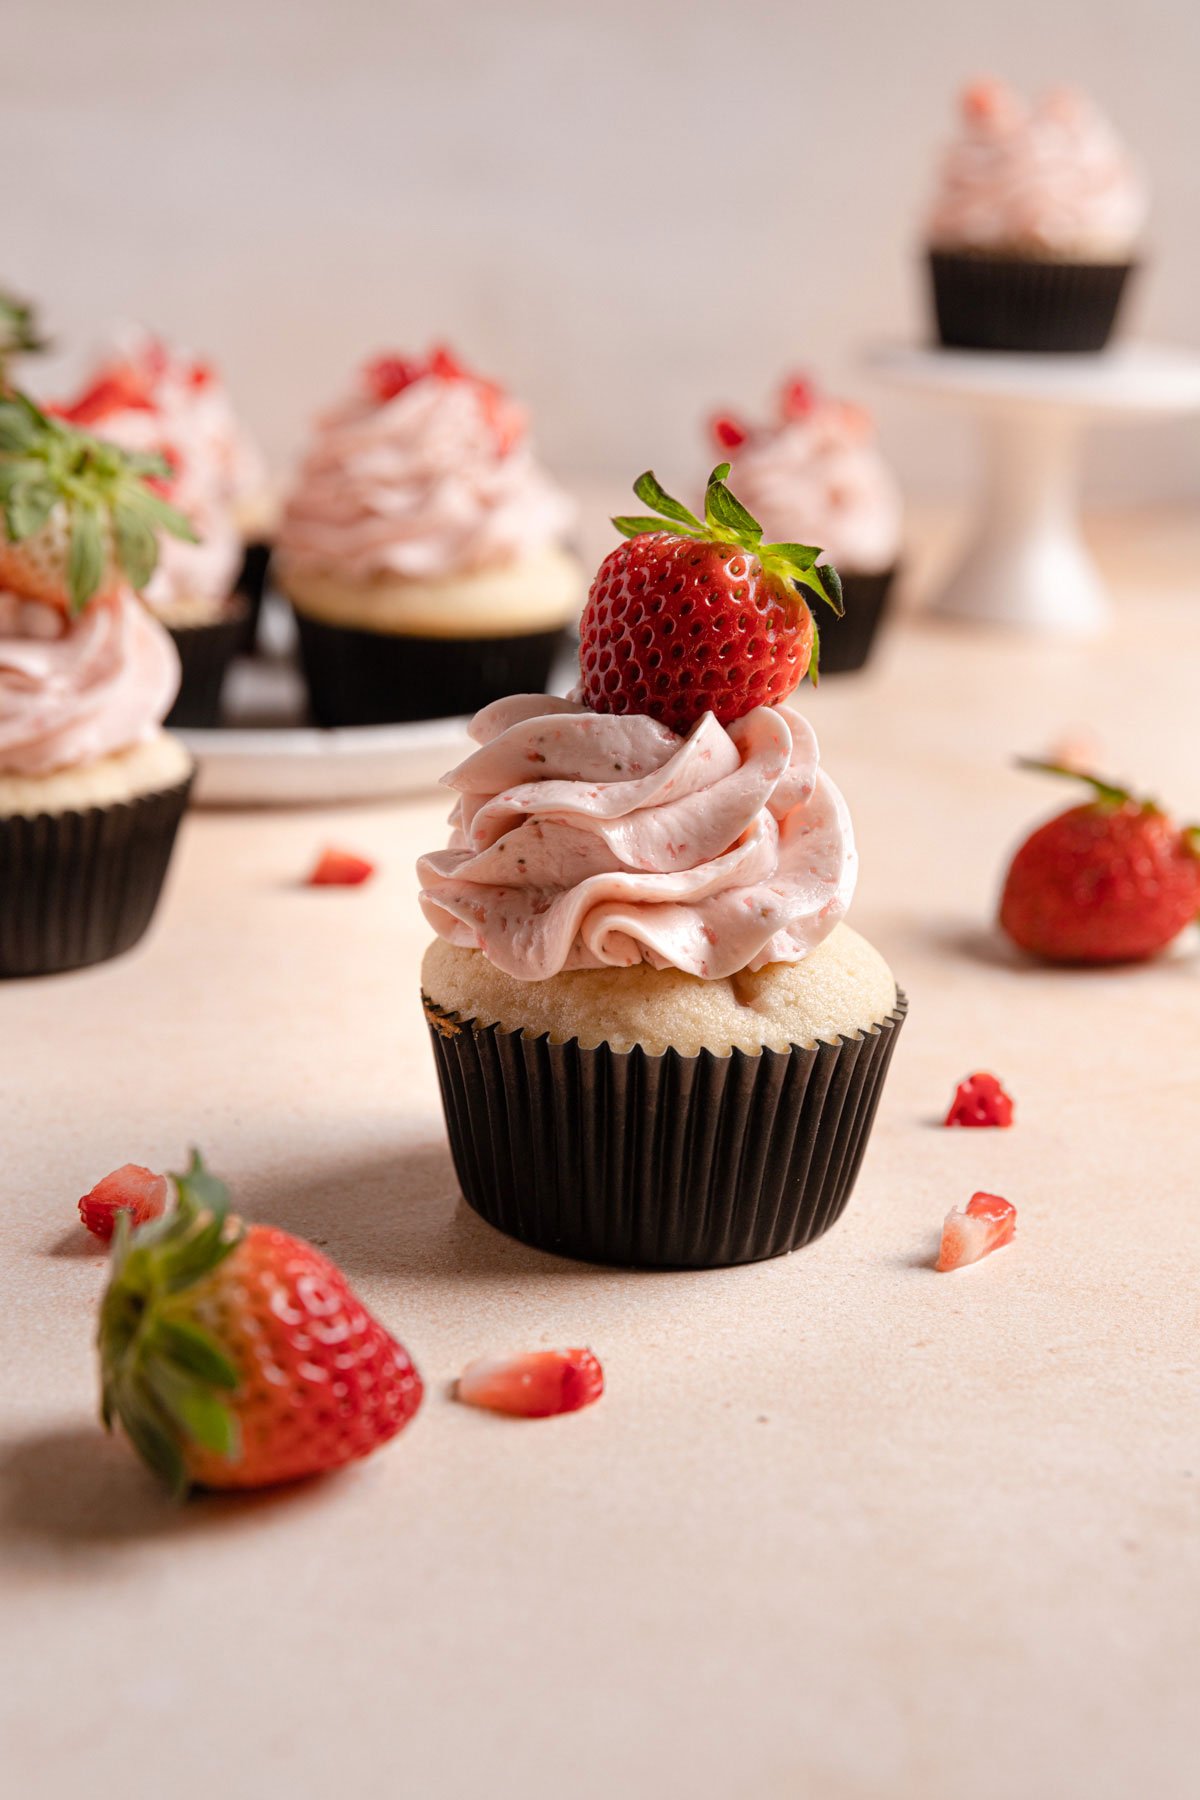 Strawberry cupcakes topped with fresh strawberries on a pink counter.